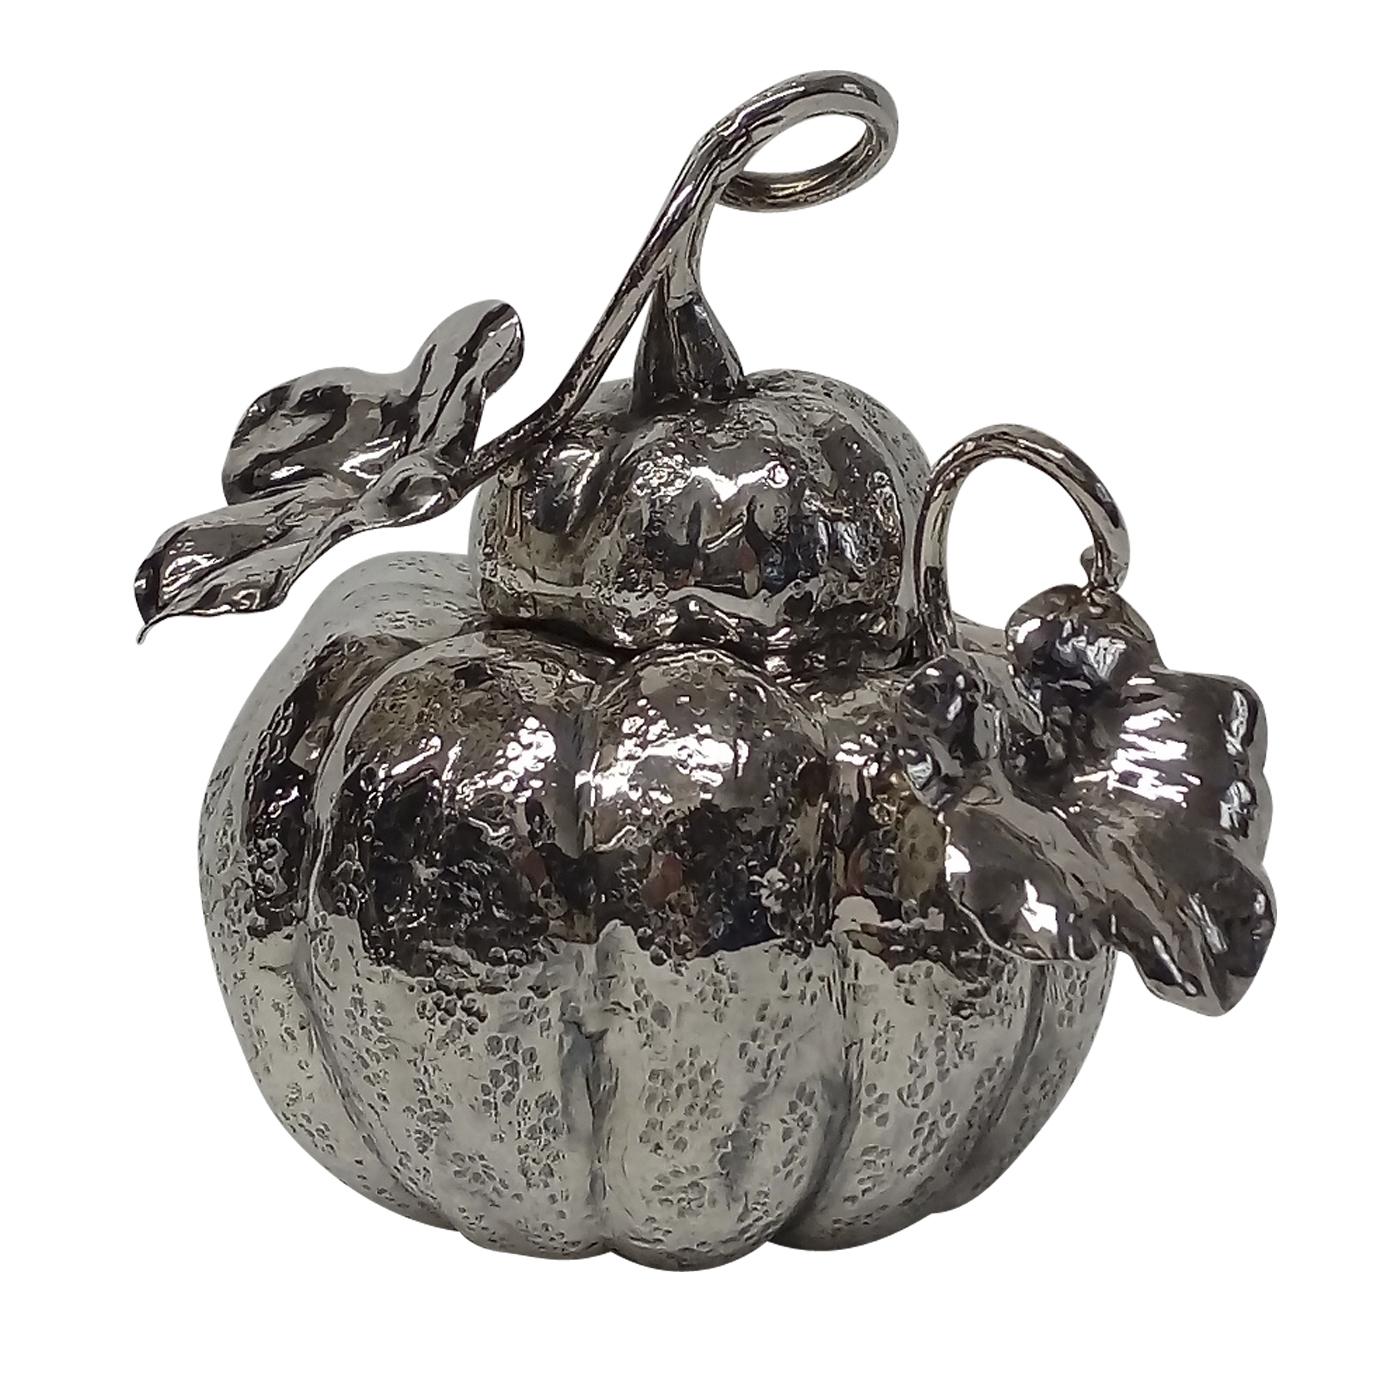 This exquisite decorative object can be used to store small personal objects or small food items. It was crafted entirely in silver by skilled artisans in the shape of a pumpkin, while its top takes the shape of the stem and leaves. The attention